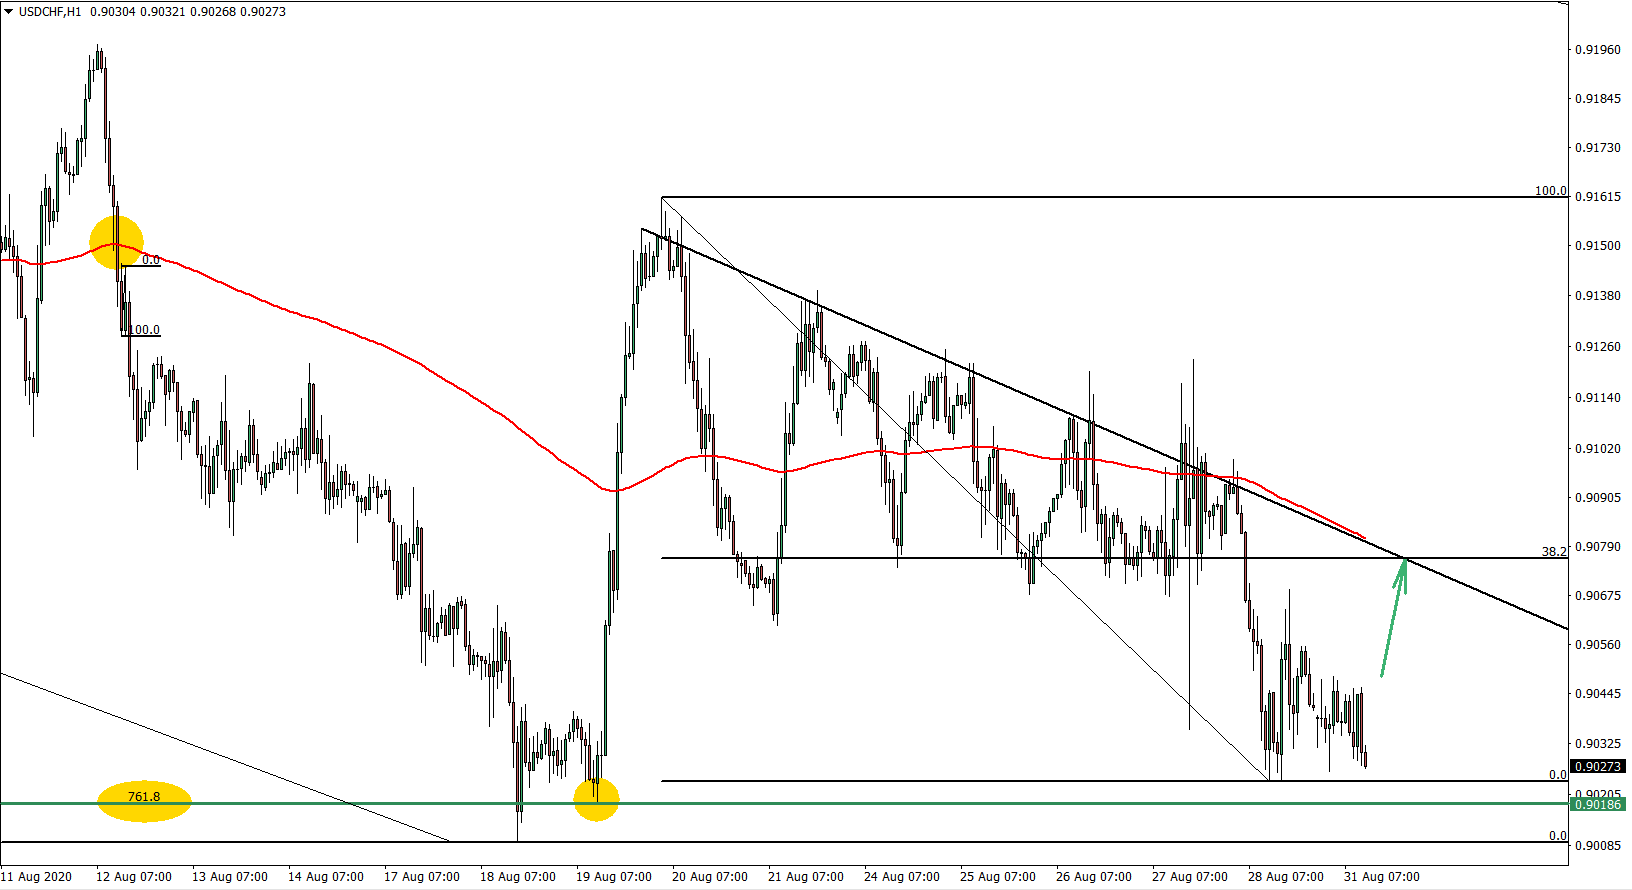 USDCHF hourly chart August 31st 2020